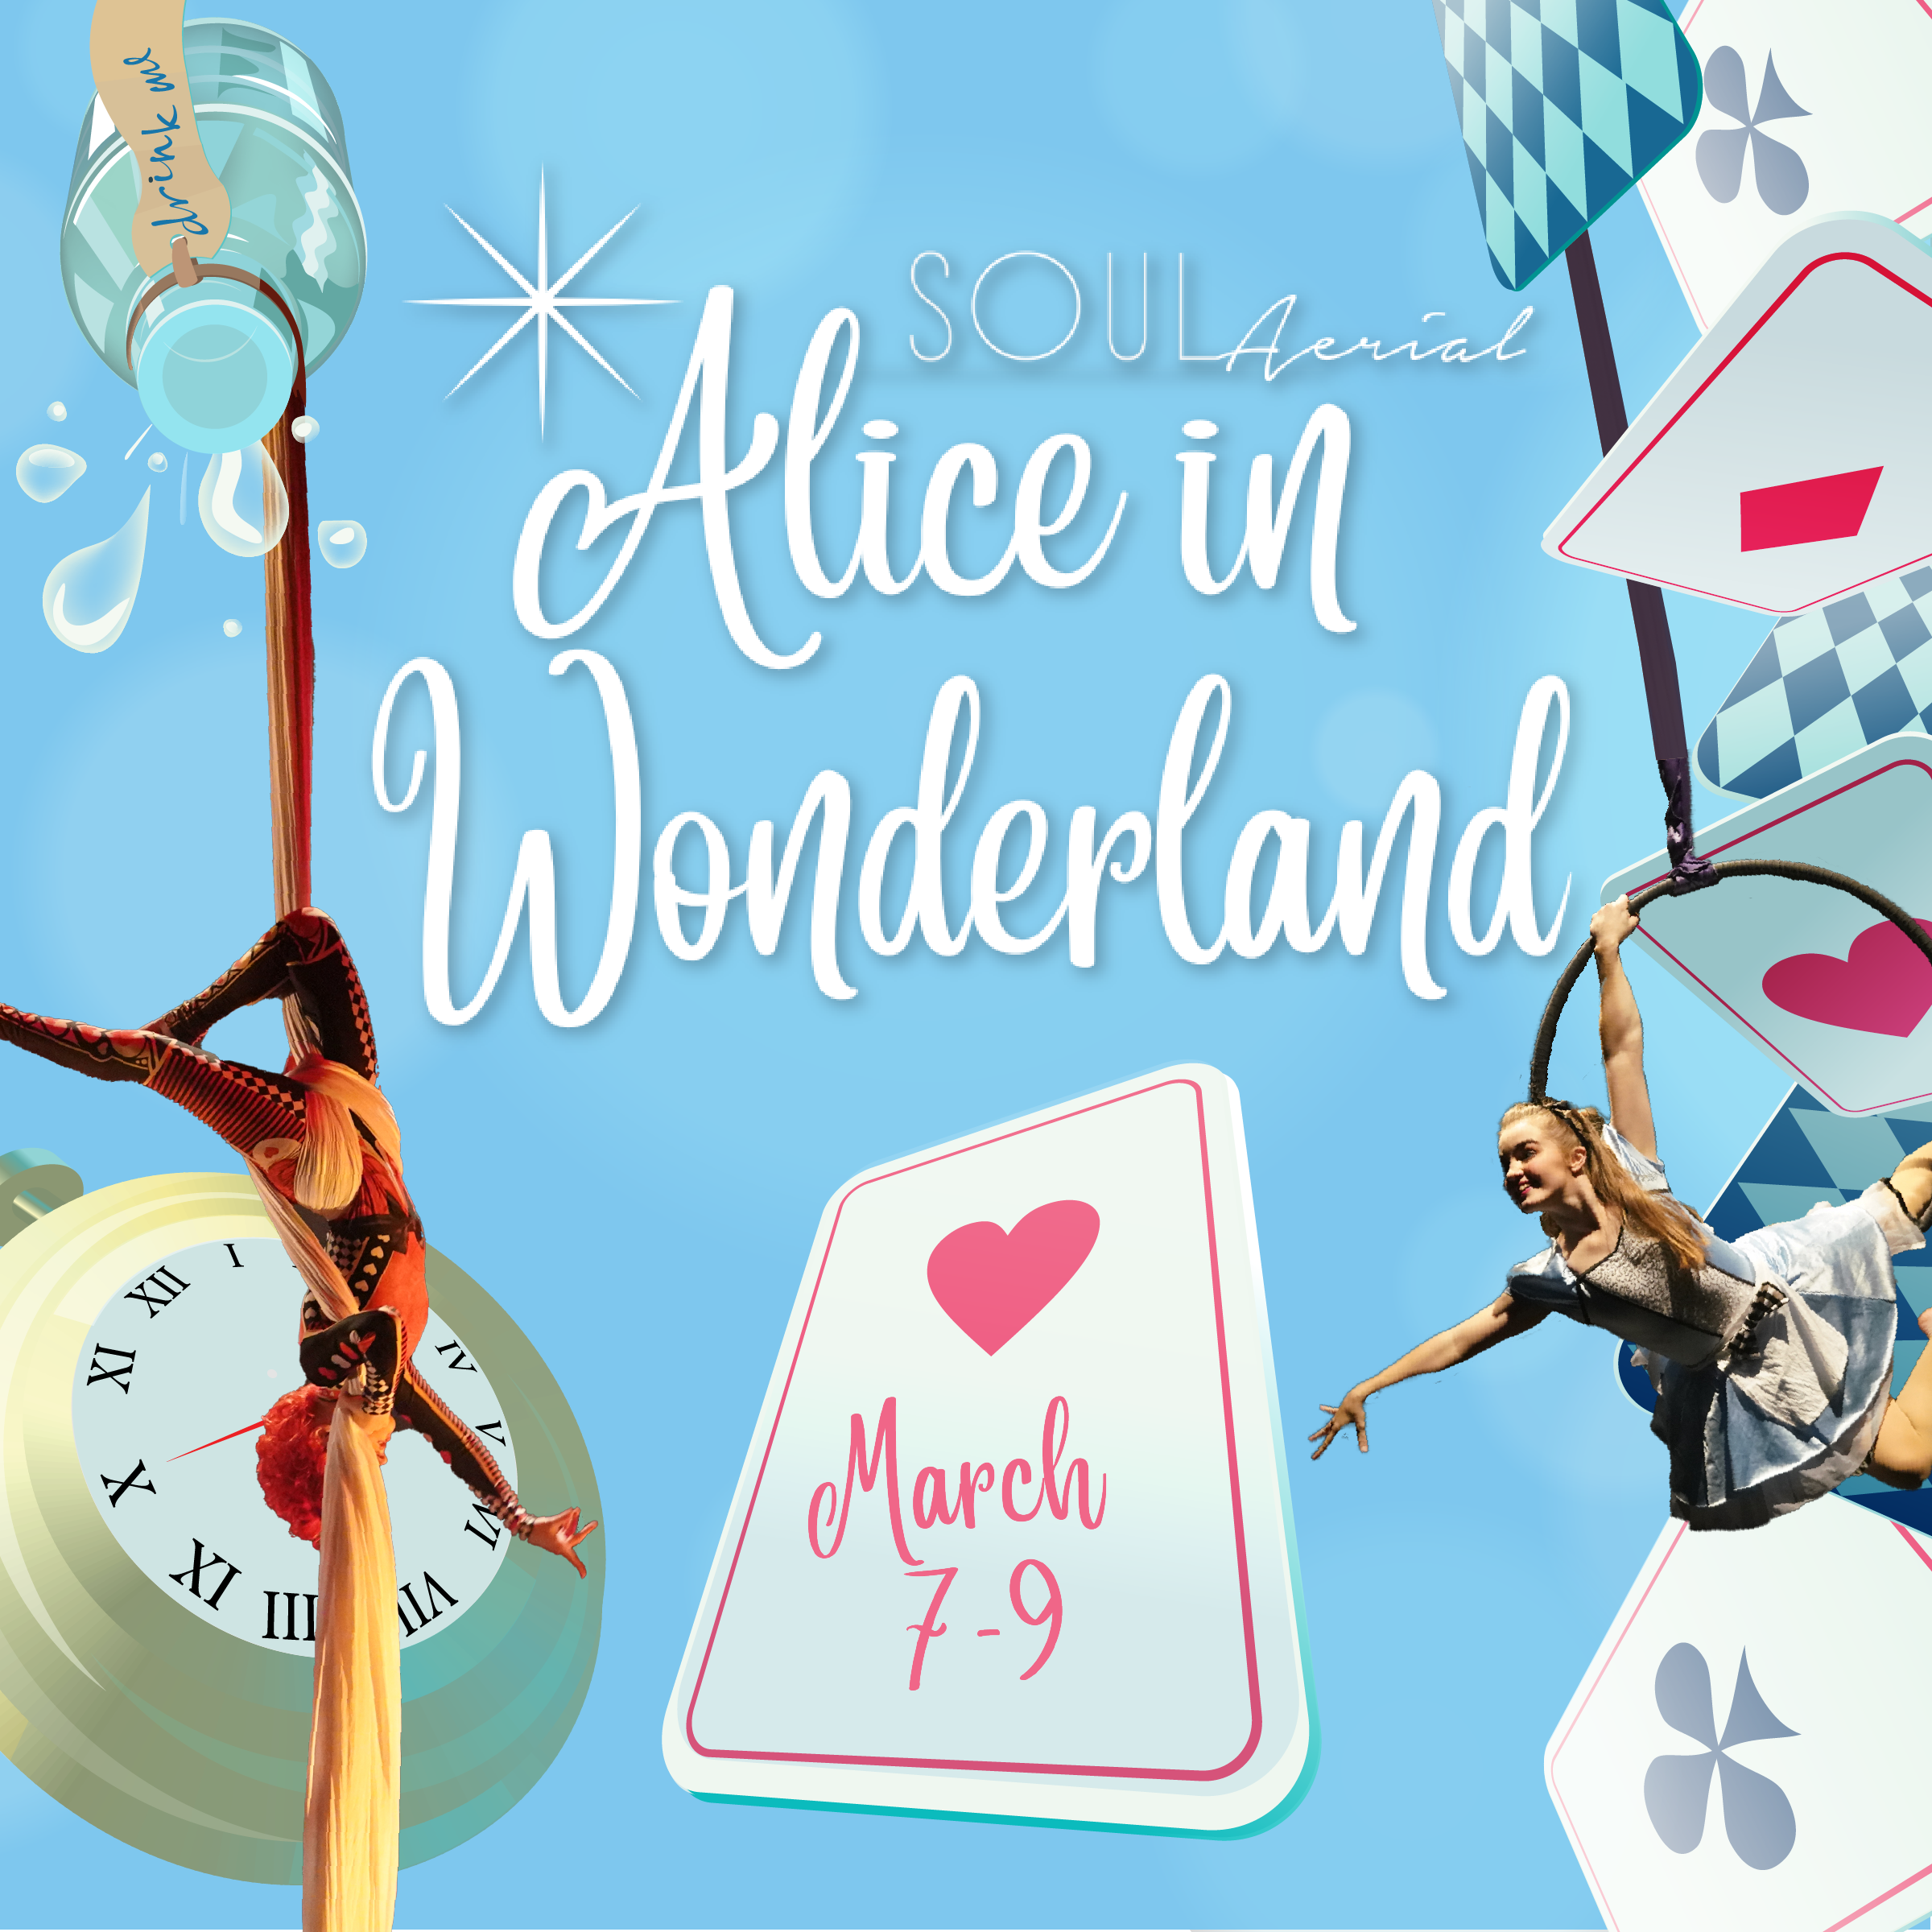 SOUL AERIAL AND PERFORMING ARTS CENTER ADDS WONDER TO ANNUAL ALICE IN WONDERLAND PRODUCTION